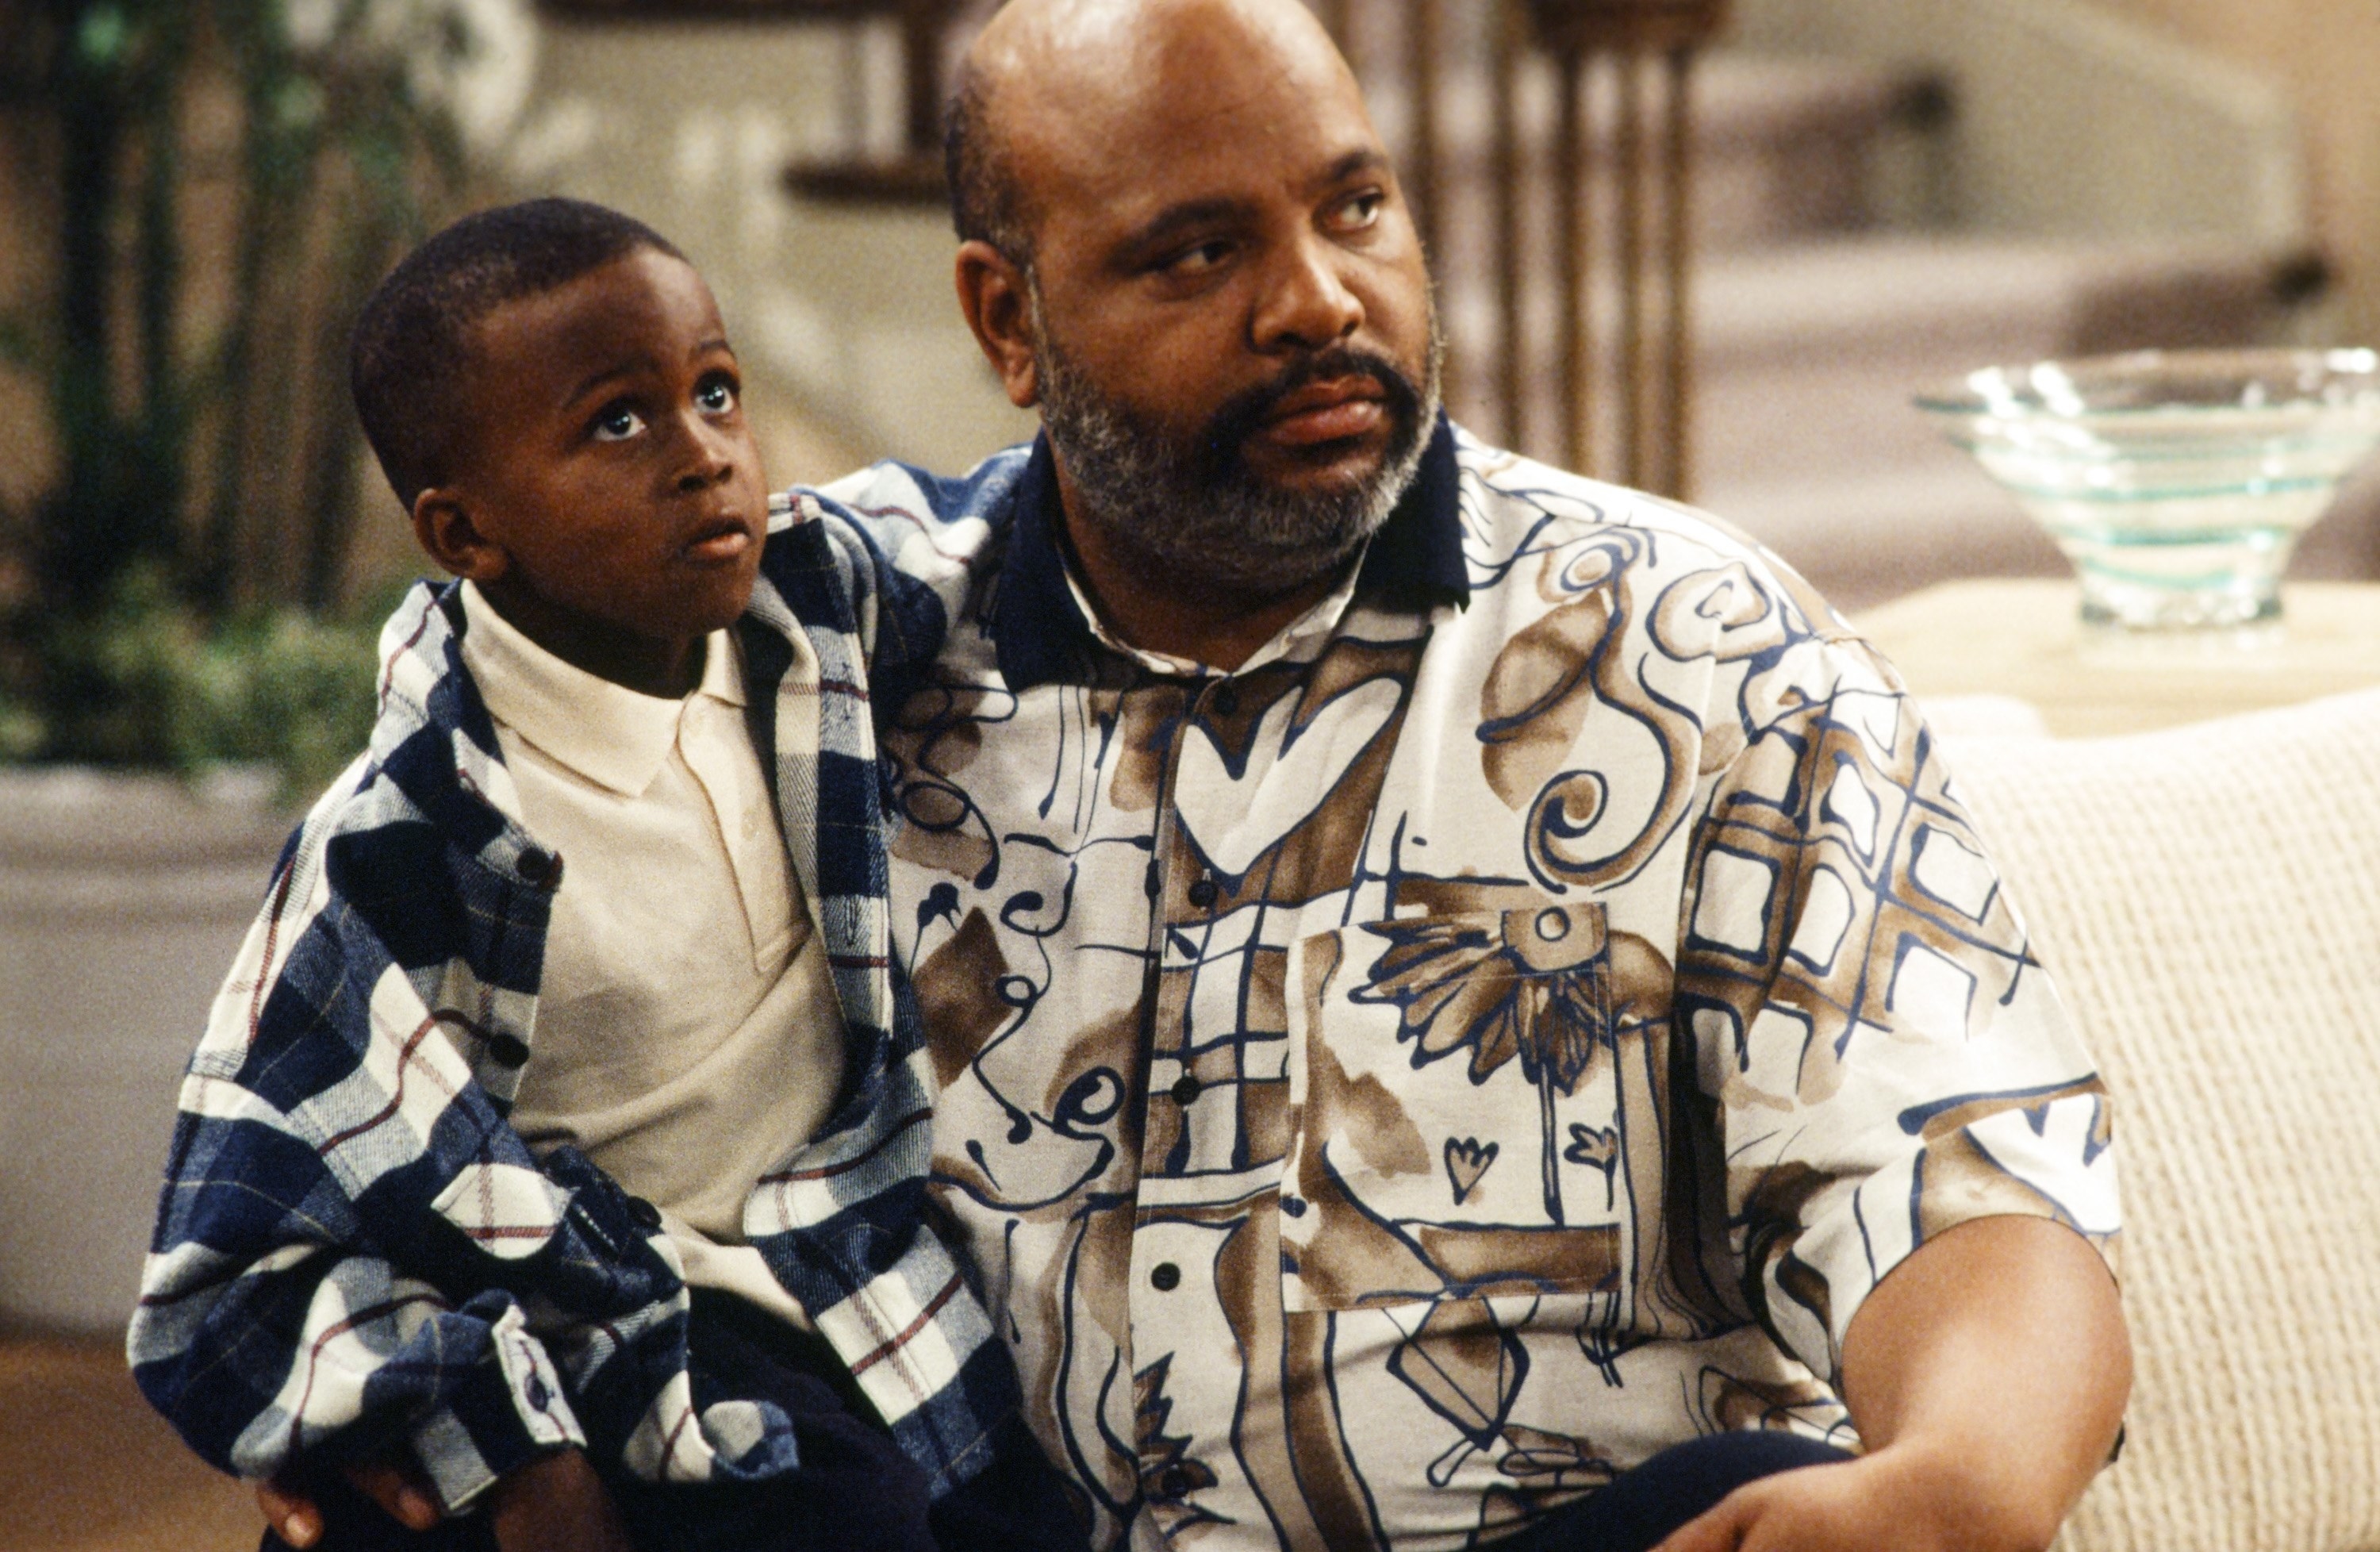 Ross on The Fresh Prince of Bel-Air with James Avery